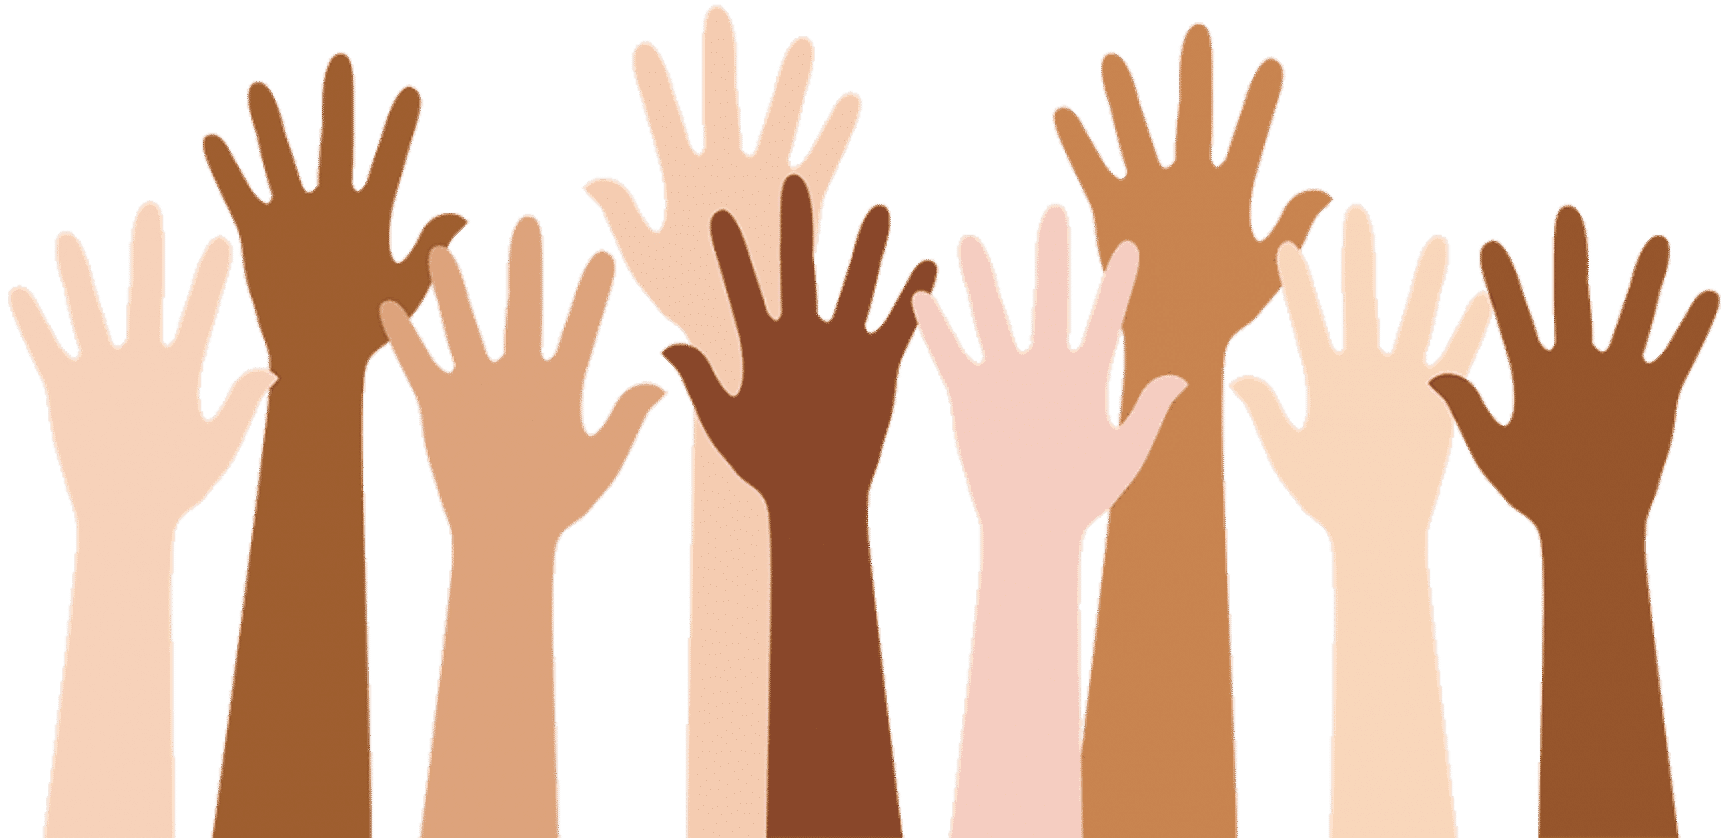 Ably solidarity statement for race equality | Ably Data in Motion